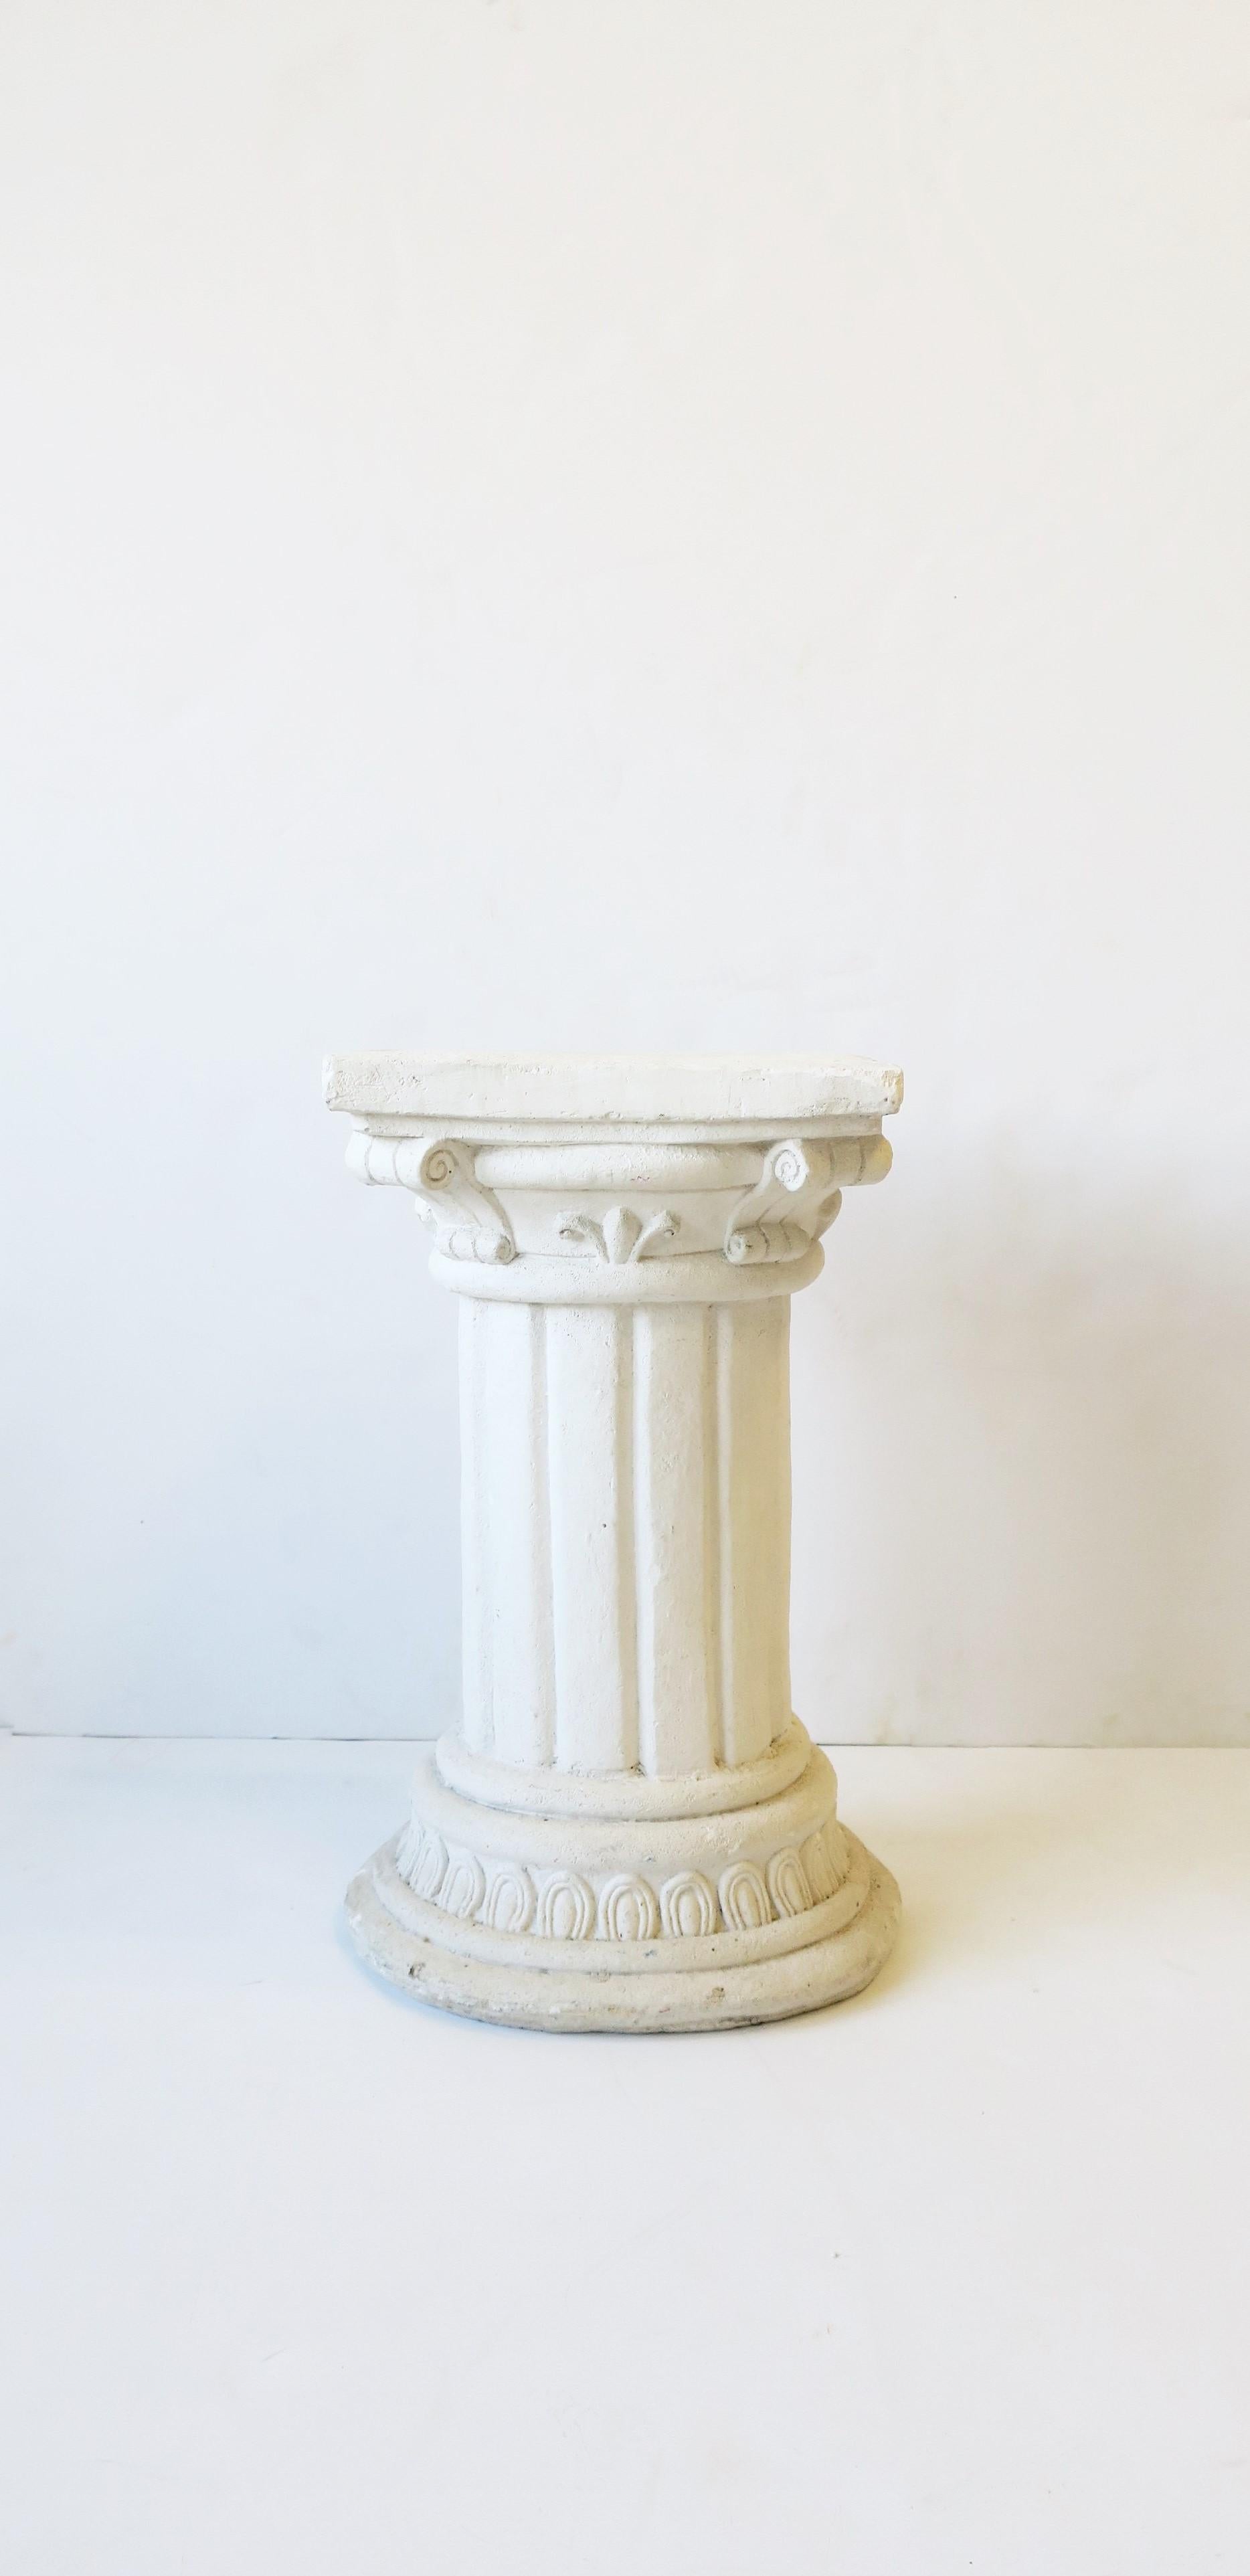 A white plaster and concrete Grecian Ionic style column pillar pedestal side or drinks table, circa mid-20th century. Piece can work as a pedestal side/drinks table or as a pedestal stand for sculpture, plant, etc. 

Dimensions include: 
9